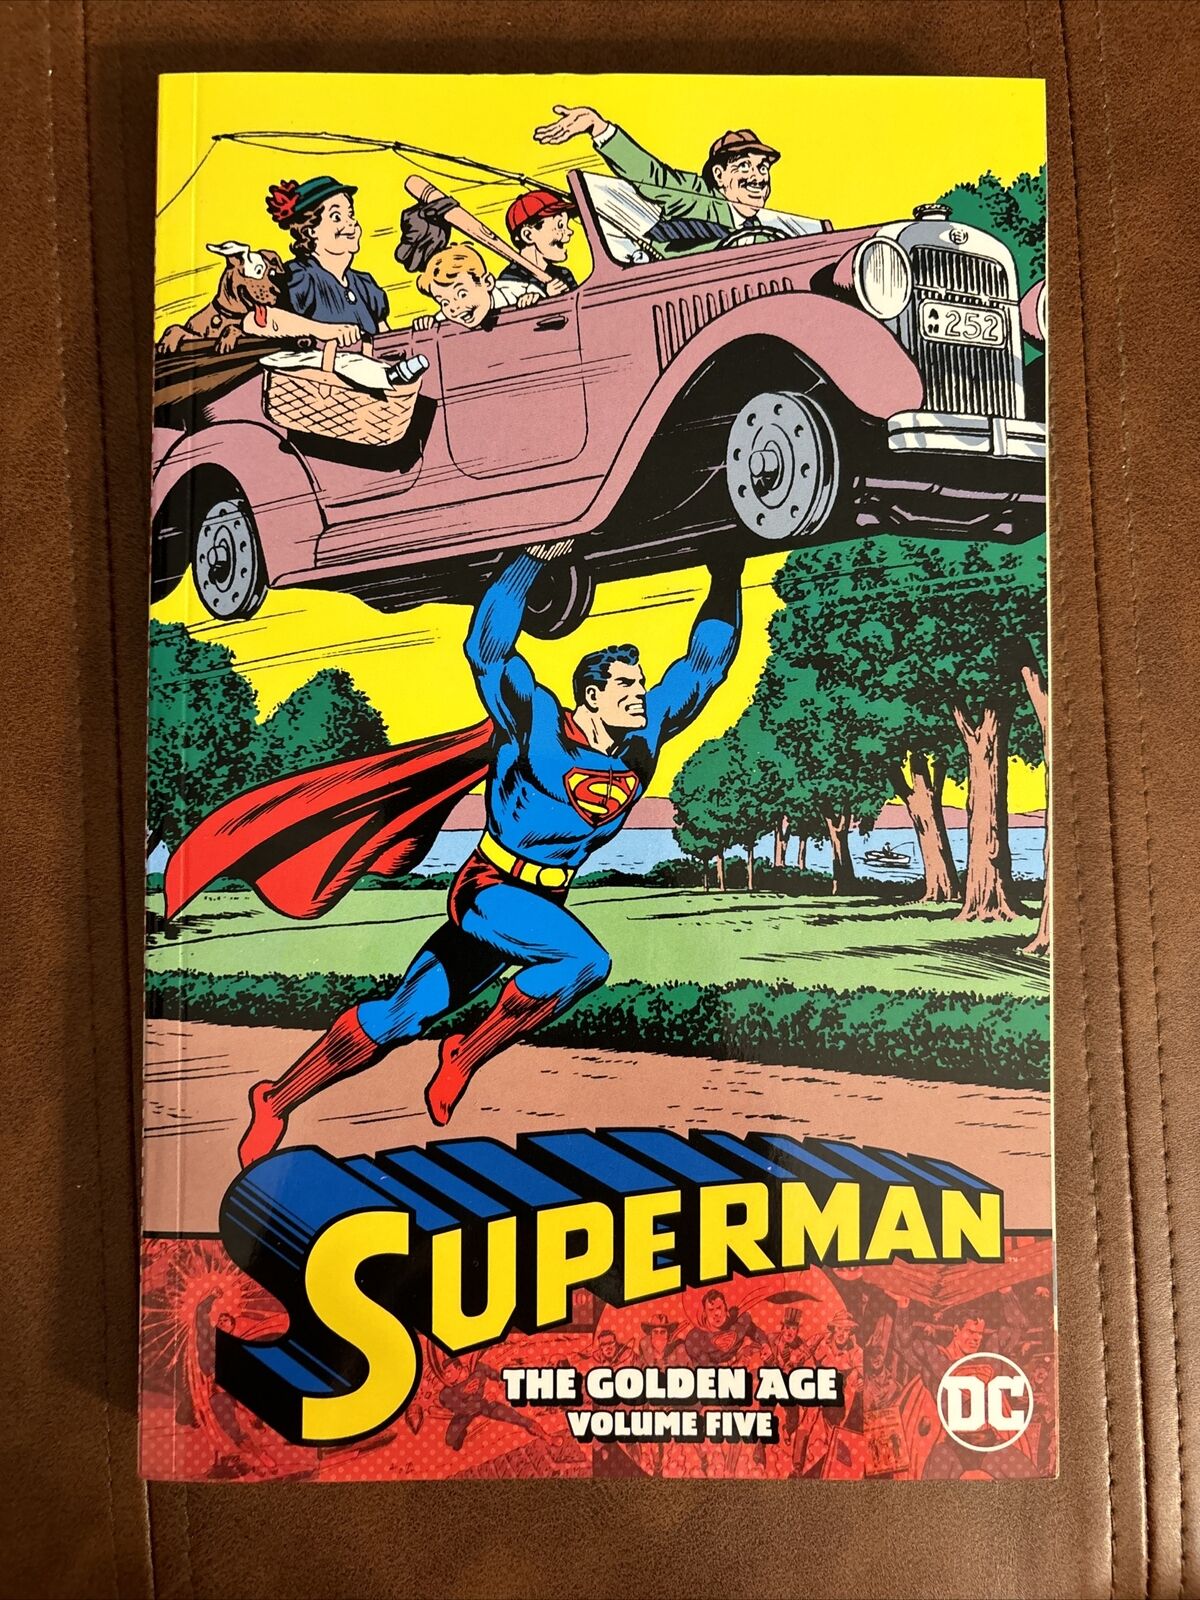 Superman: The Golden Age Vol. 5 by Various (Paperback)